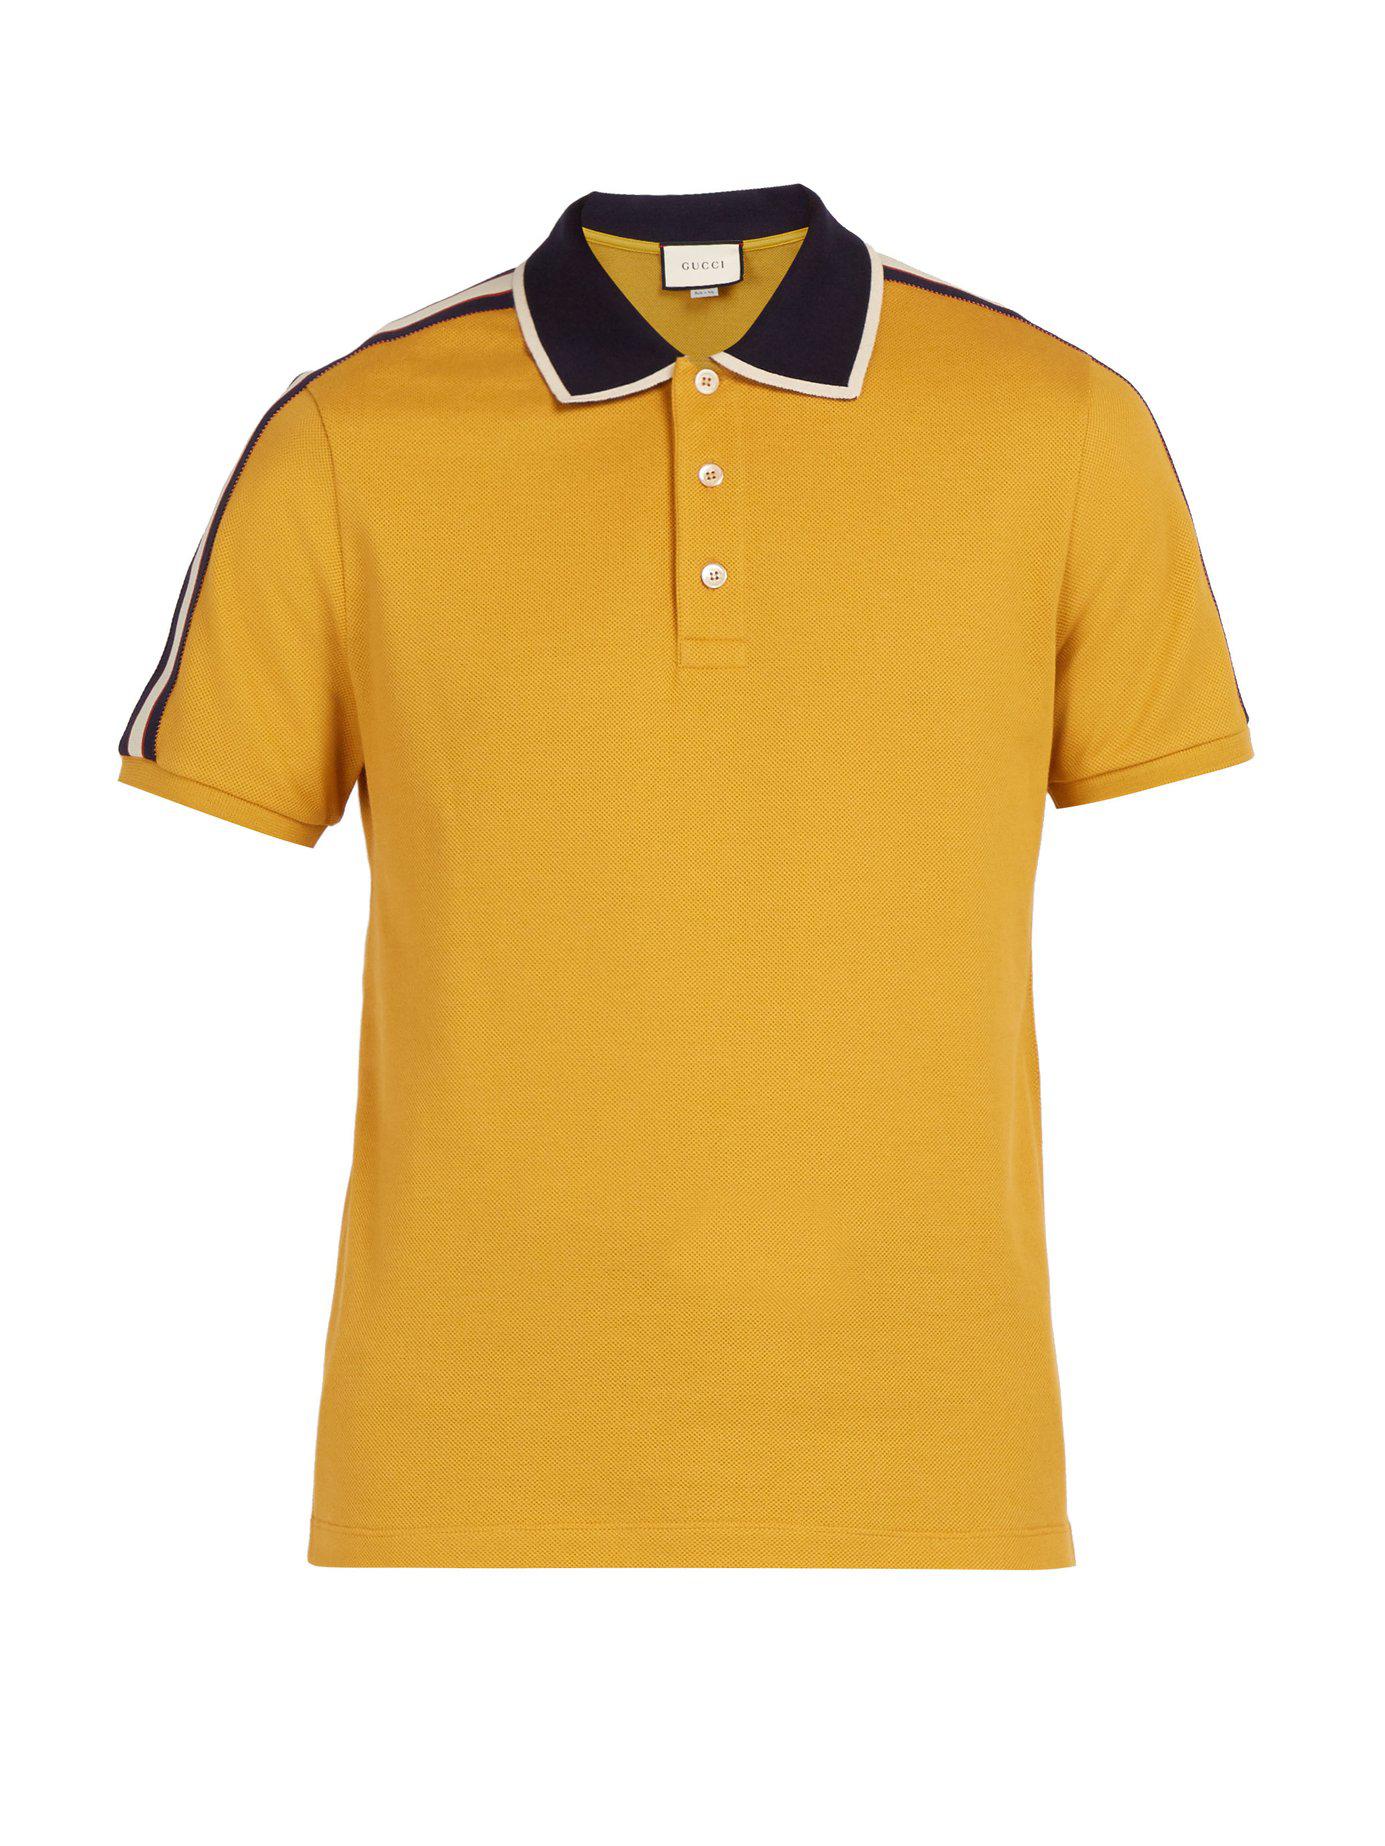 Gucci Logo Sleeve Cotton Blend Piqué Polo Shirt in Yellow for Men | Lyst